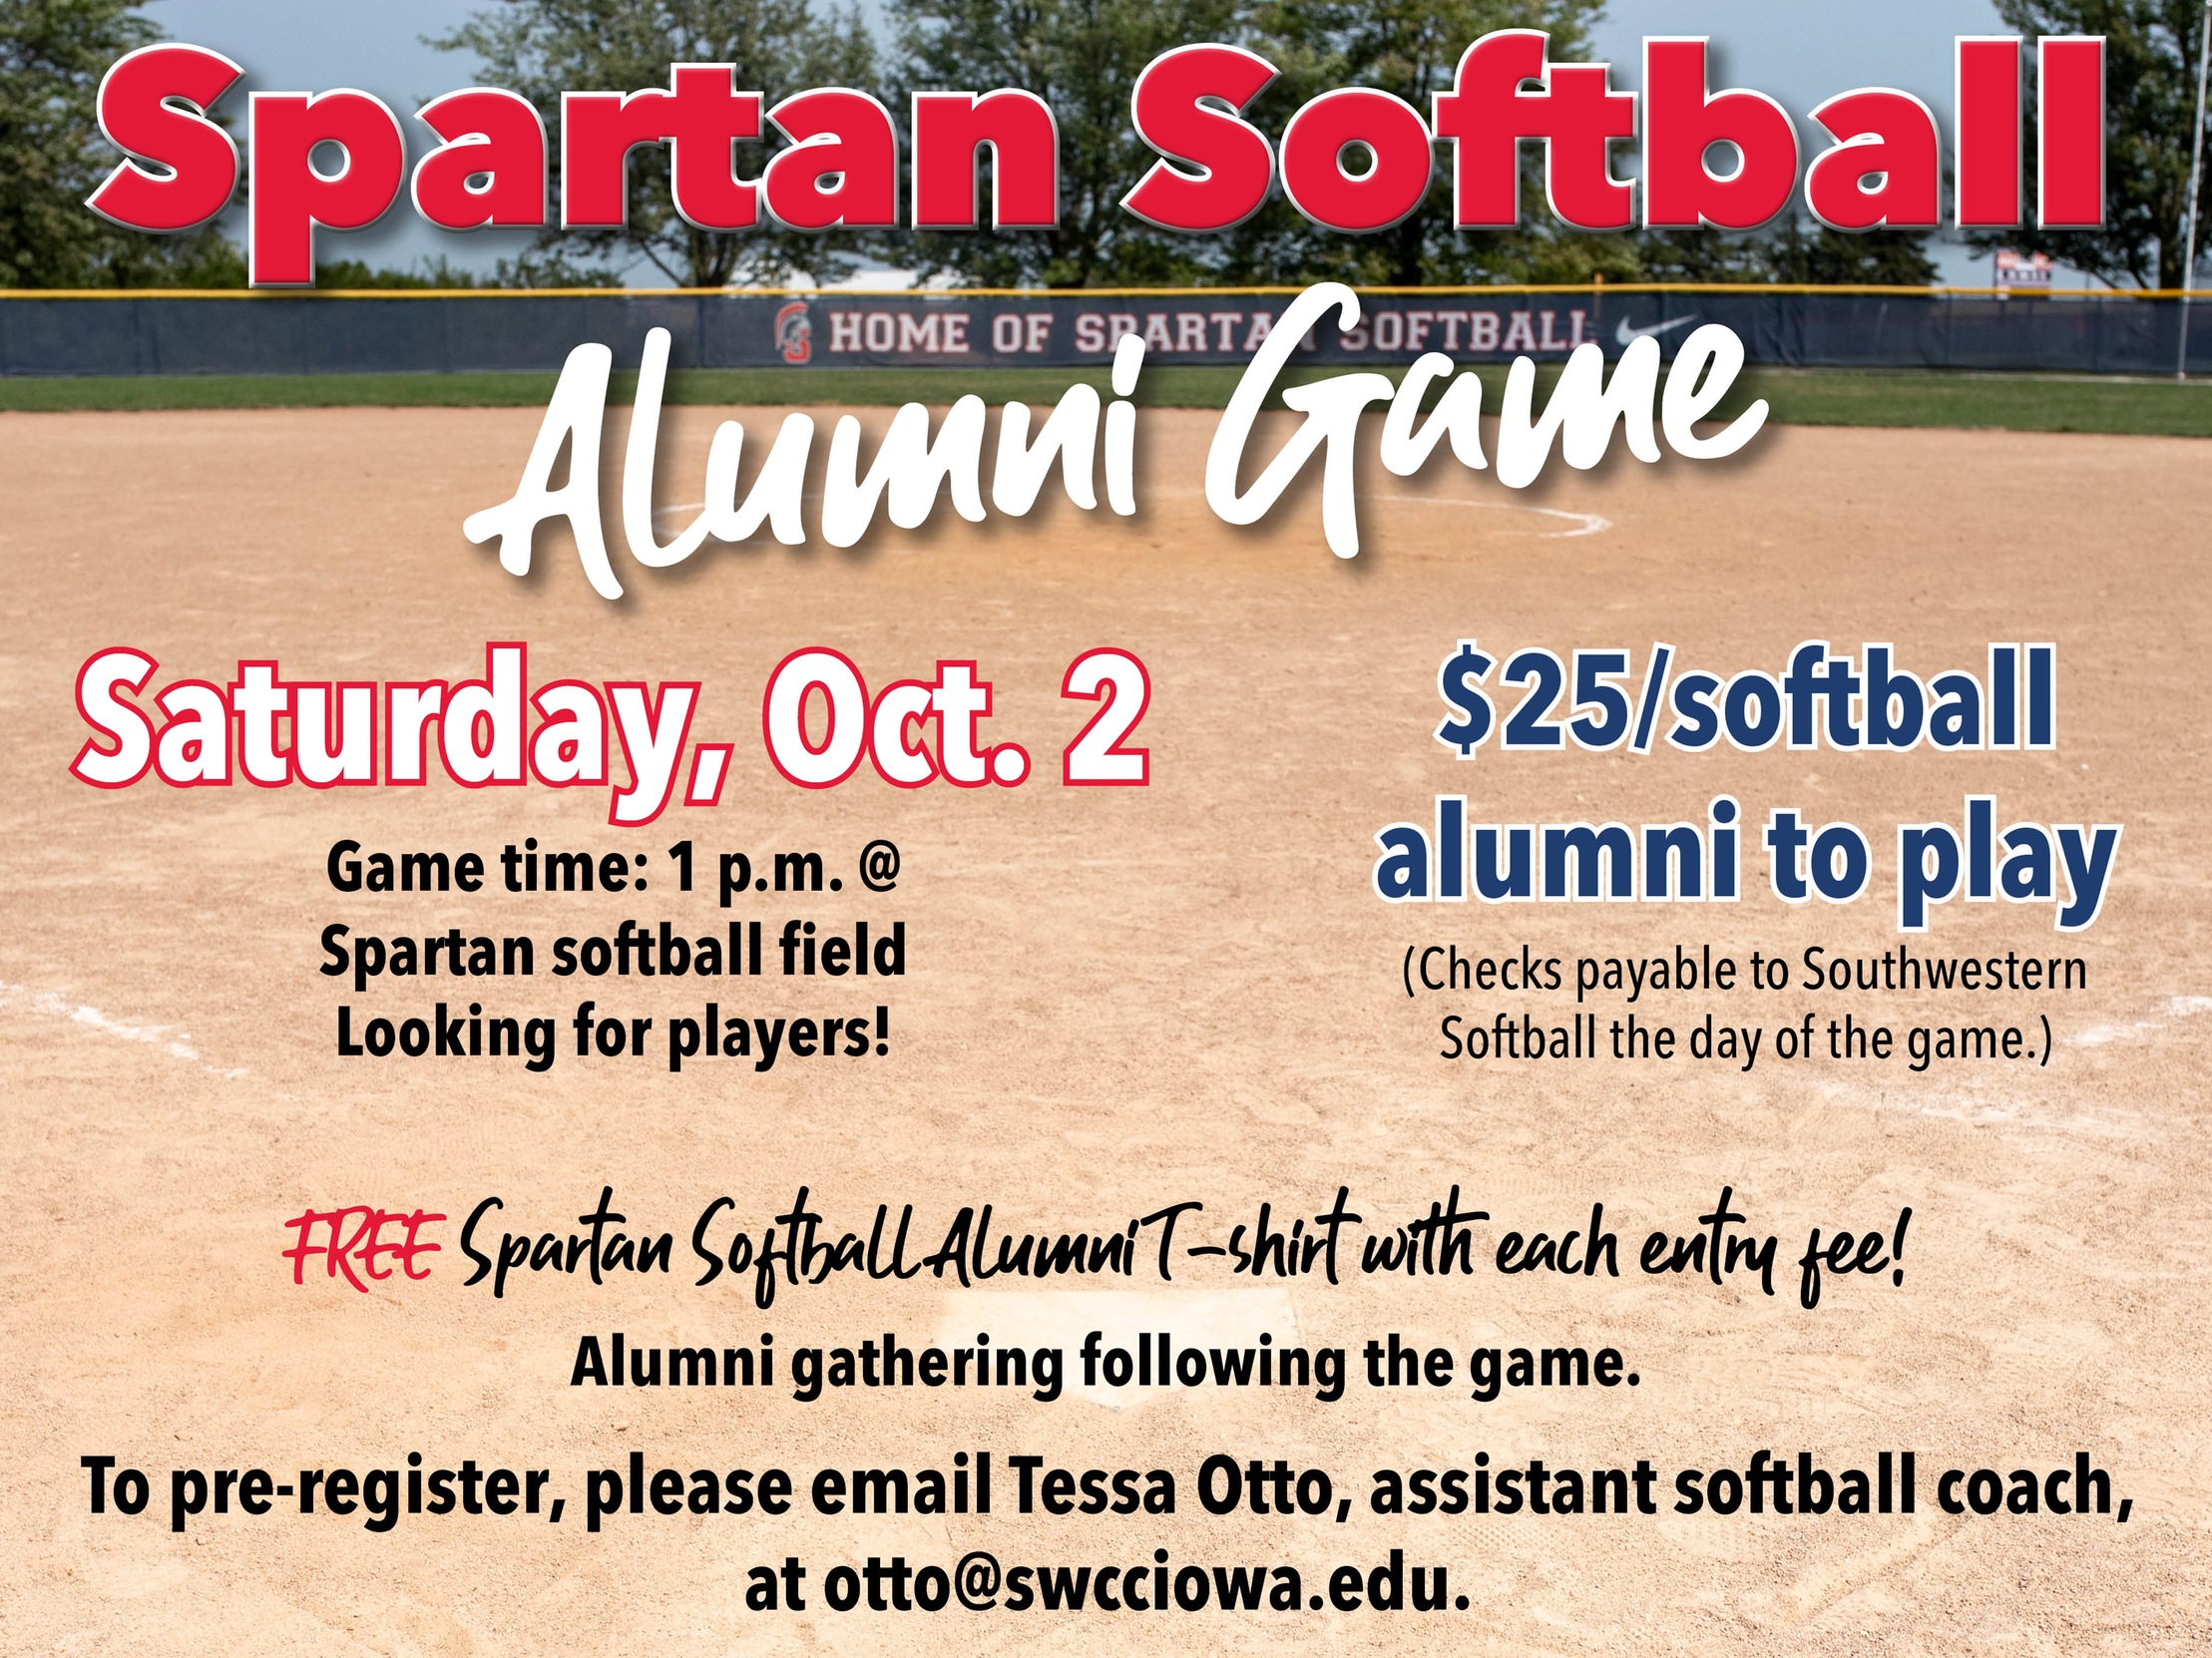 Spartan Softball Alumni Game information with photo of softball field in the background